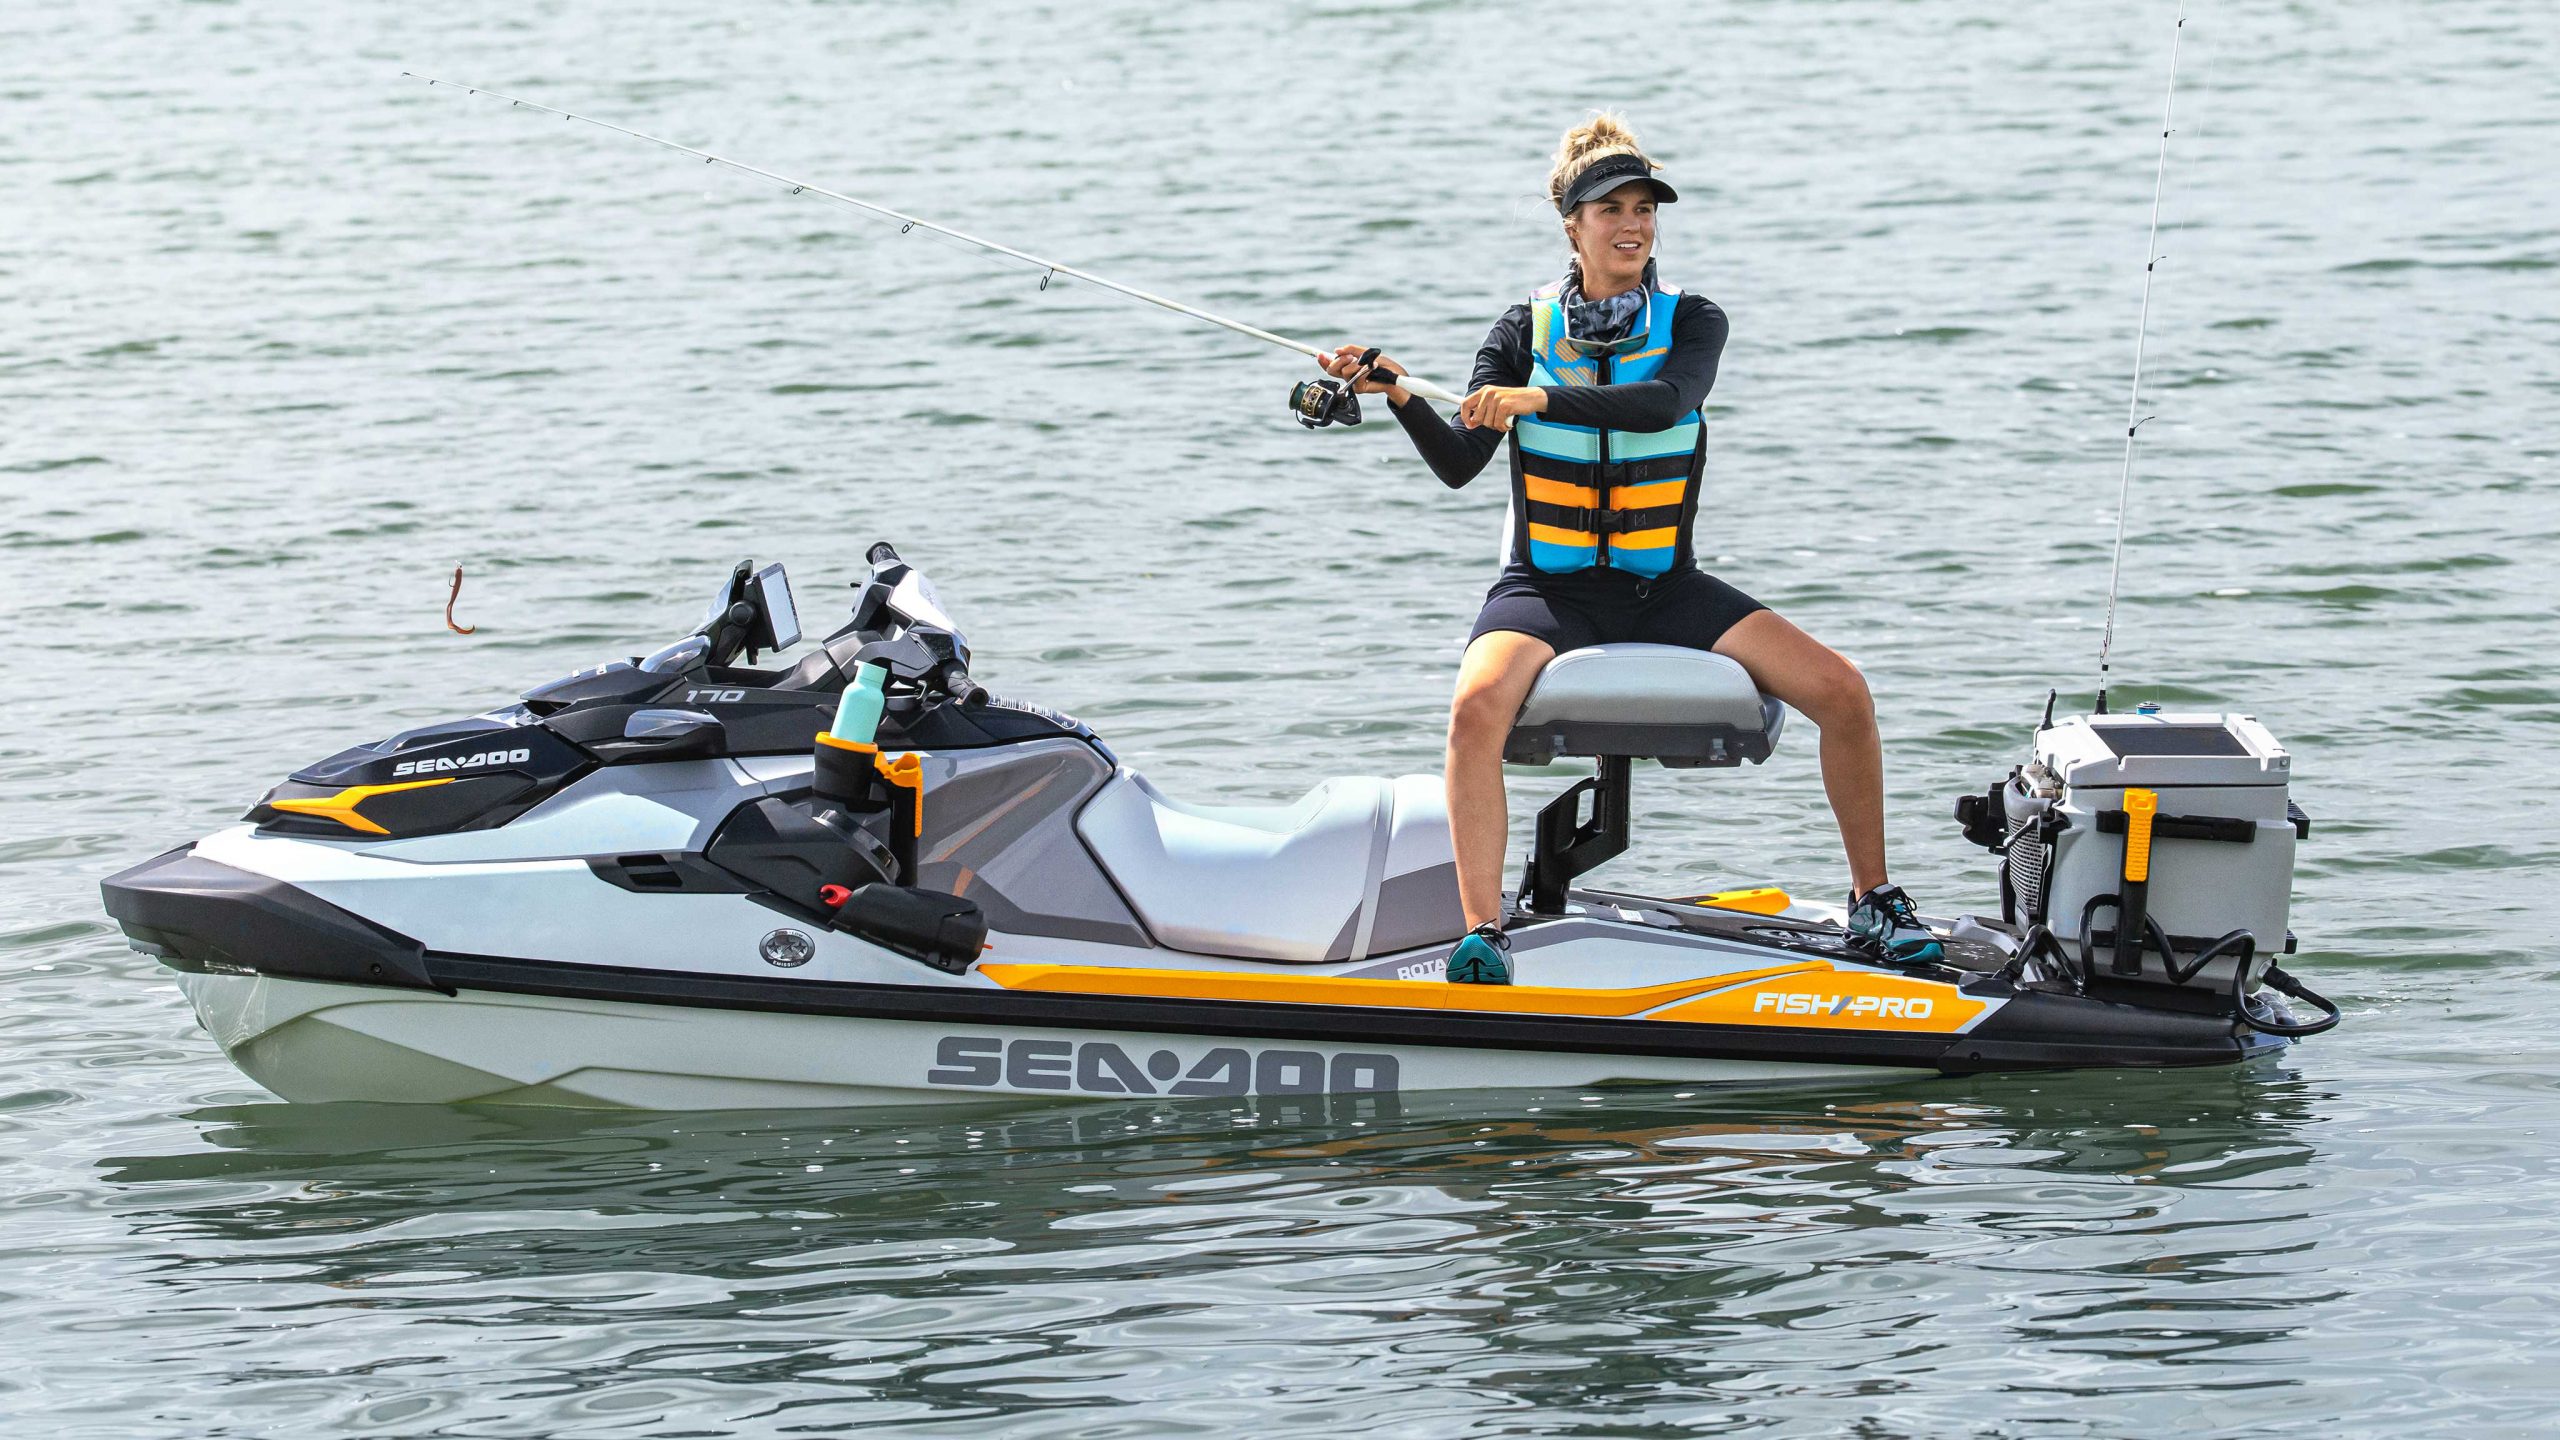 2022 SeaDoo Fish Pro expands to three models, gains new accessories